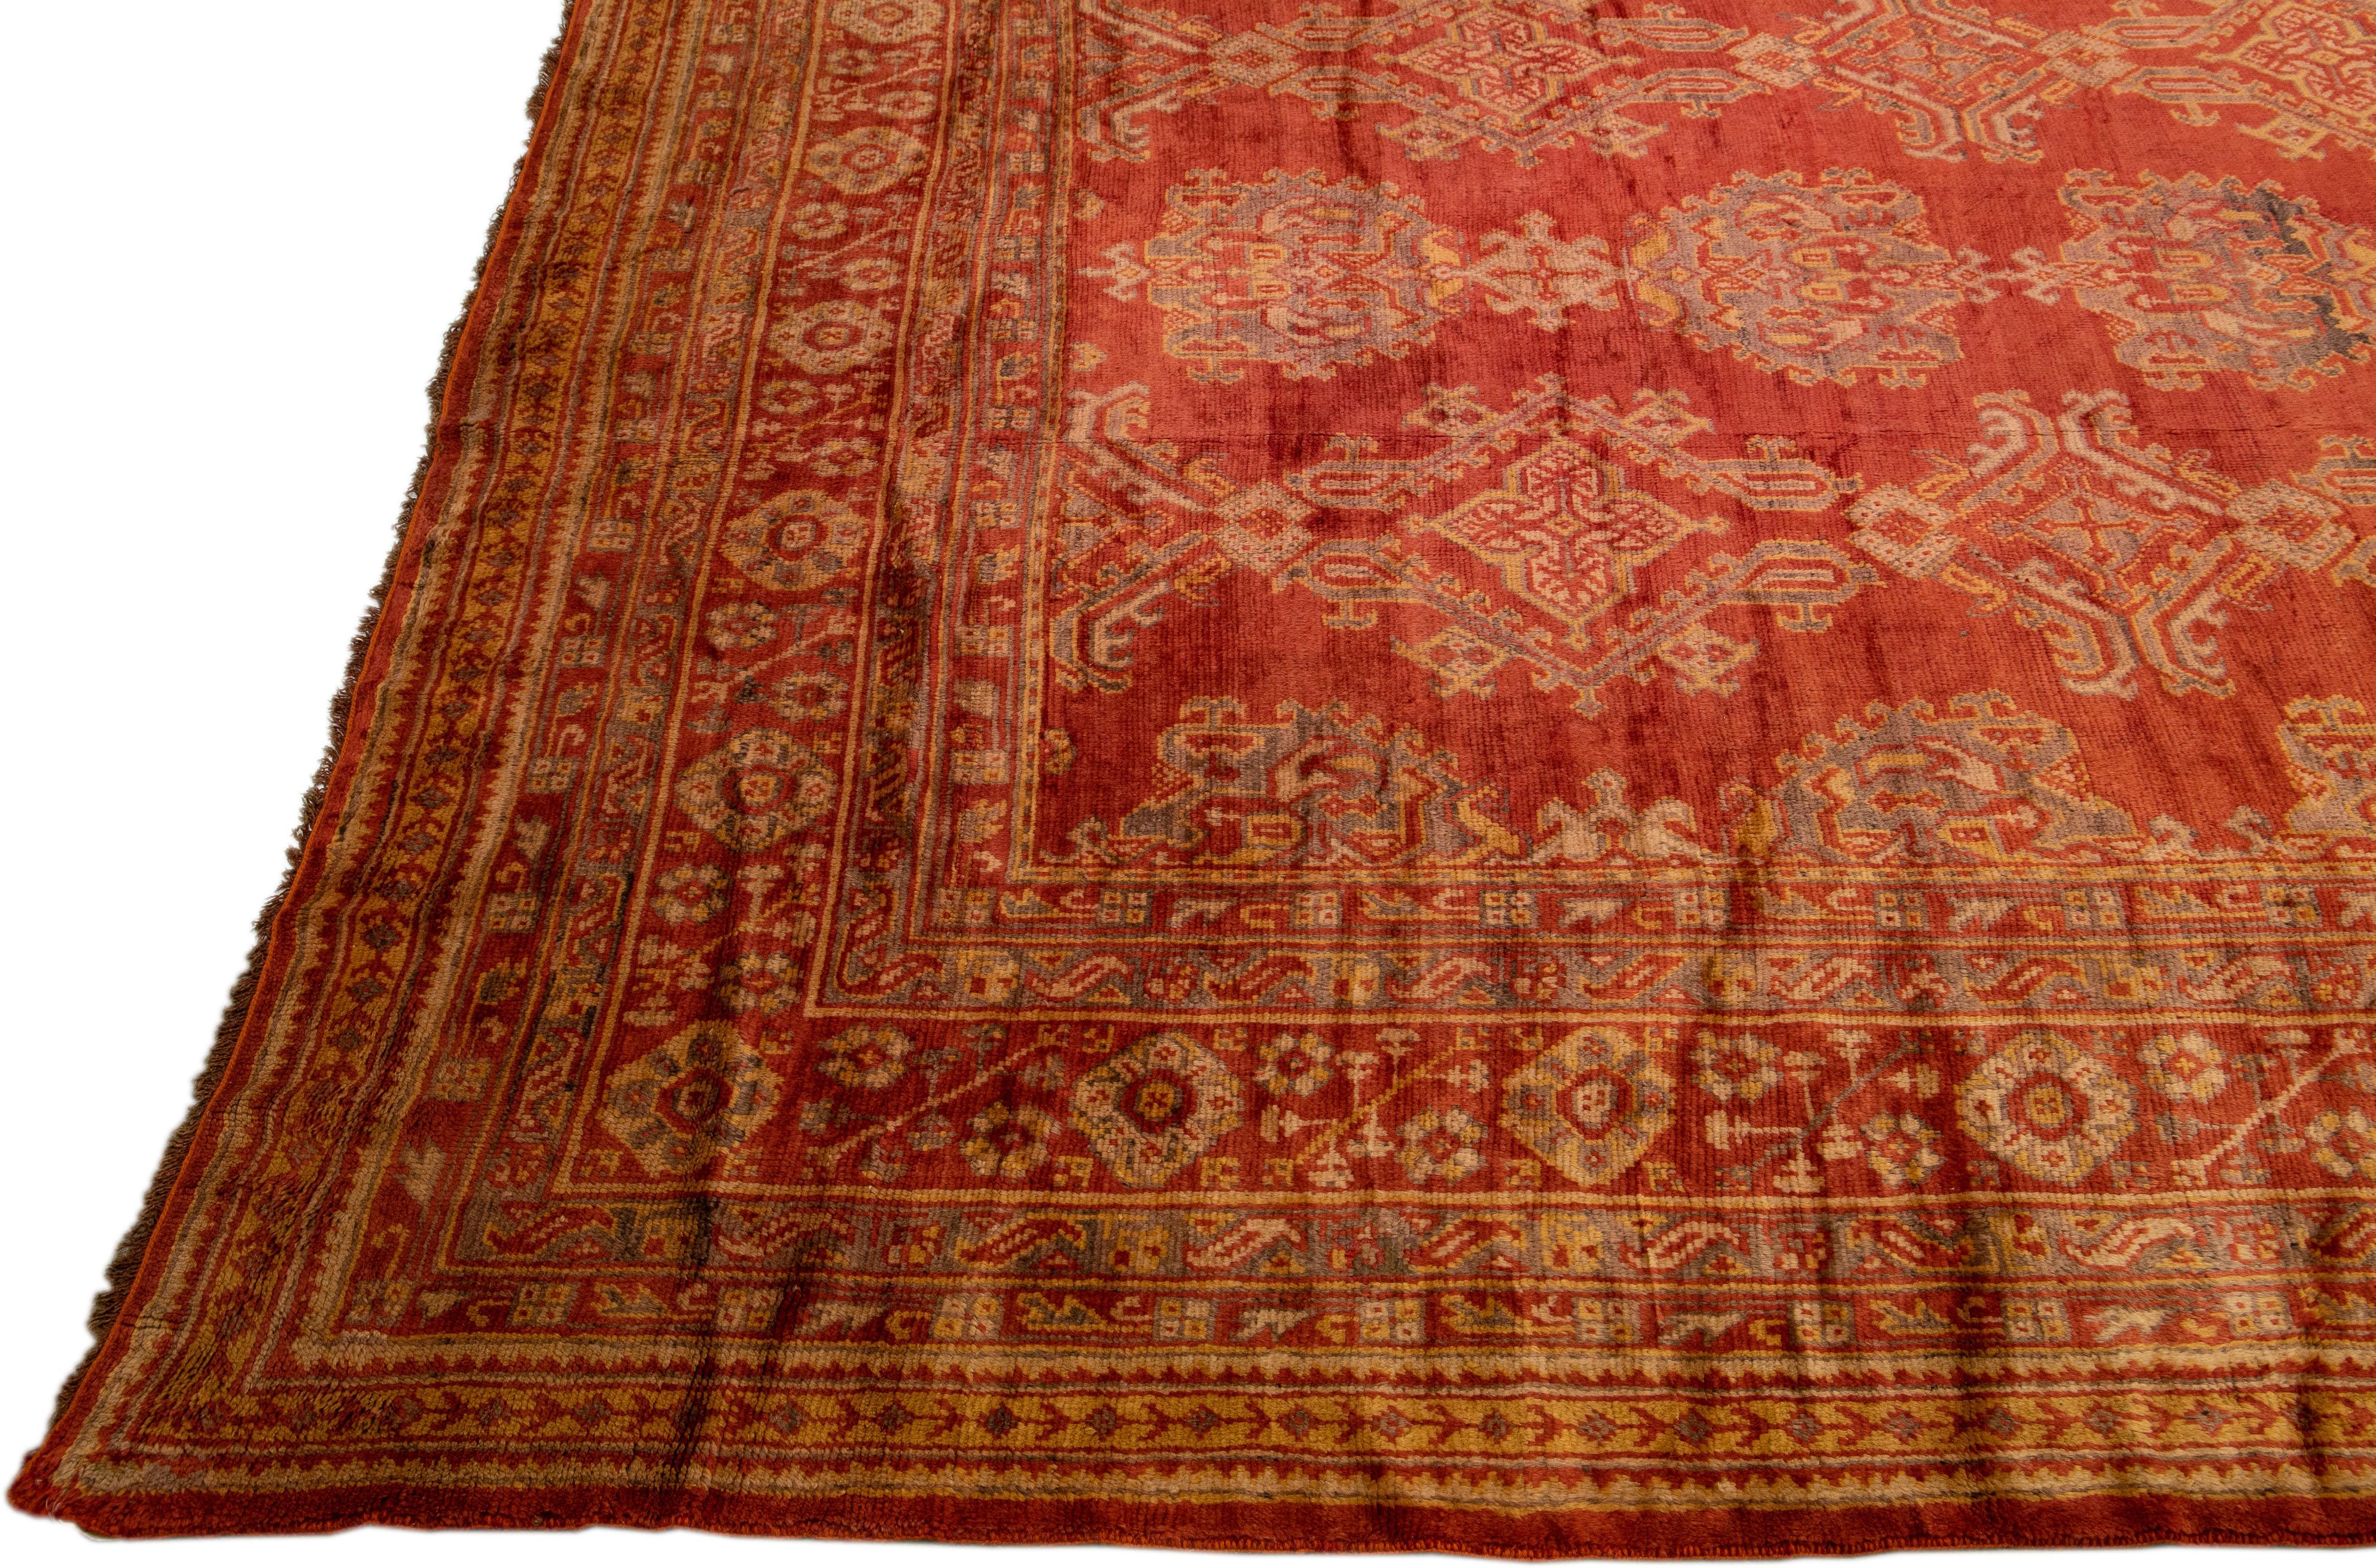 Antique Turkish Oushak Handmade Orange-Rust Wool Rug with Geometric Pattern In Excellent Condition For Sale In Norwalk, CT